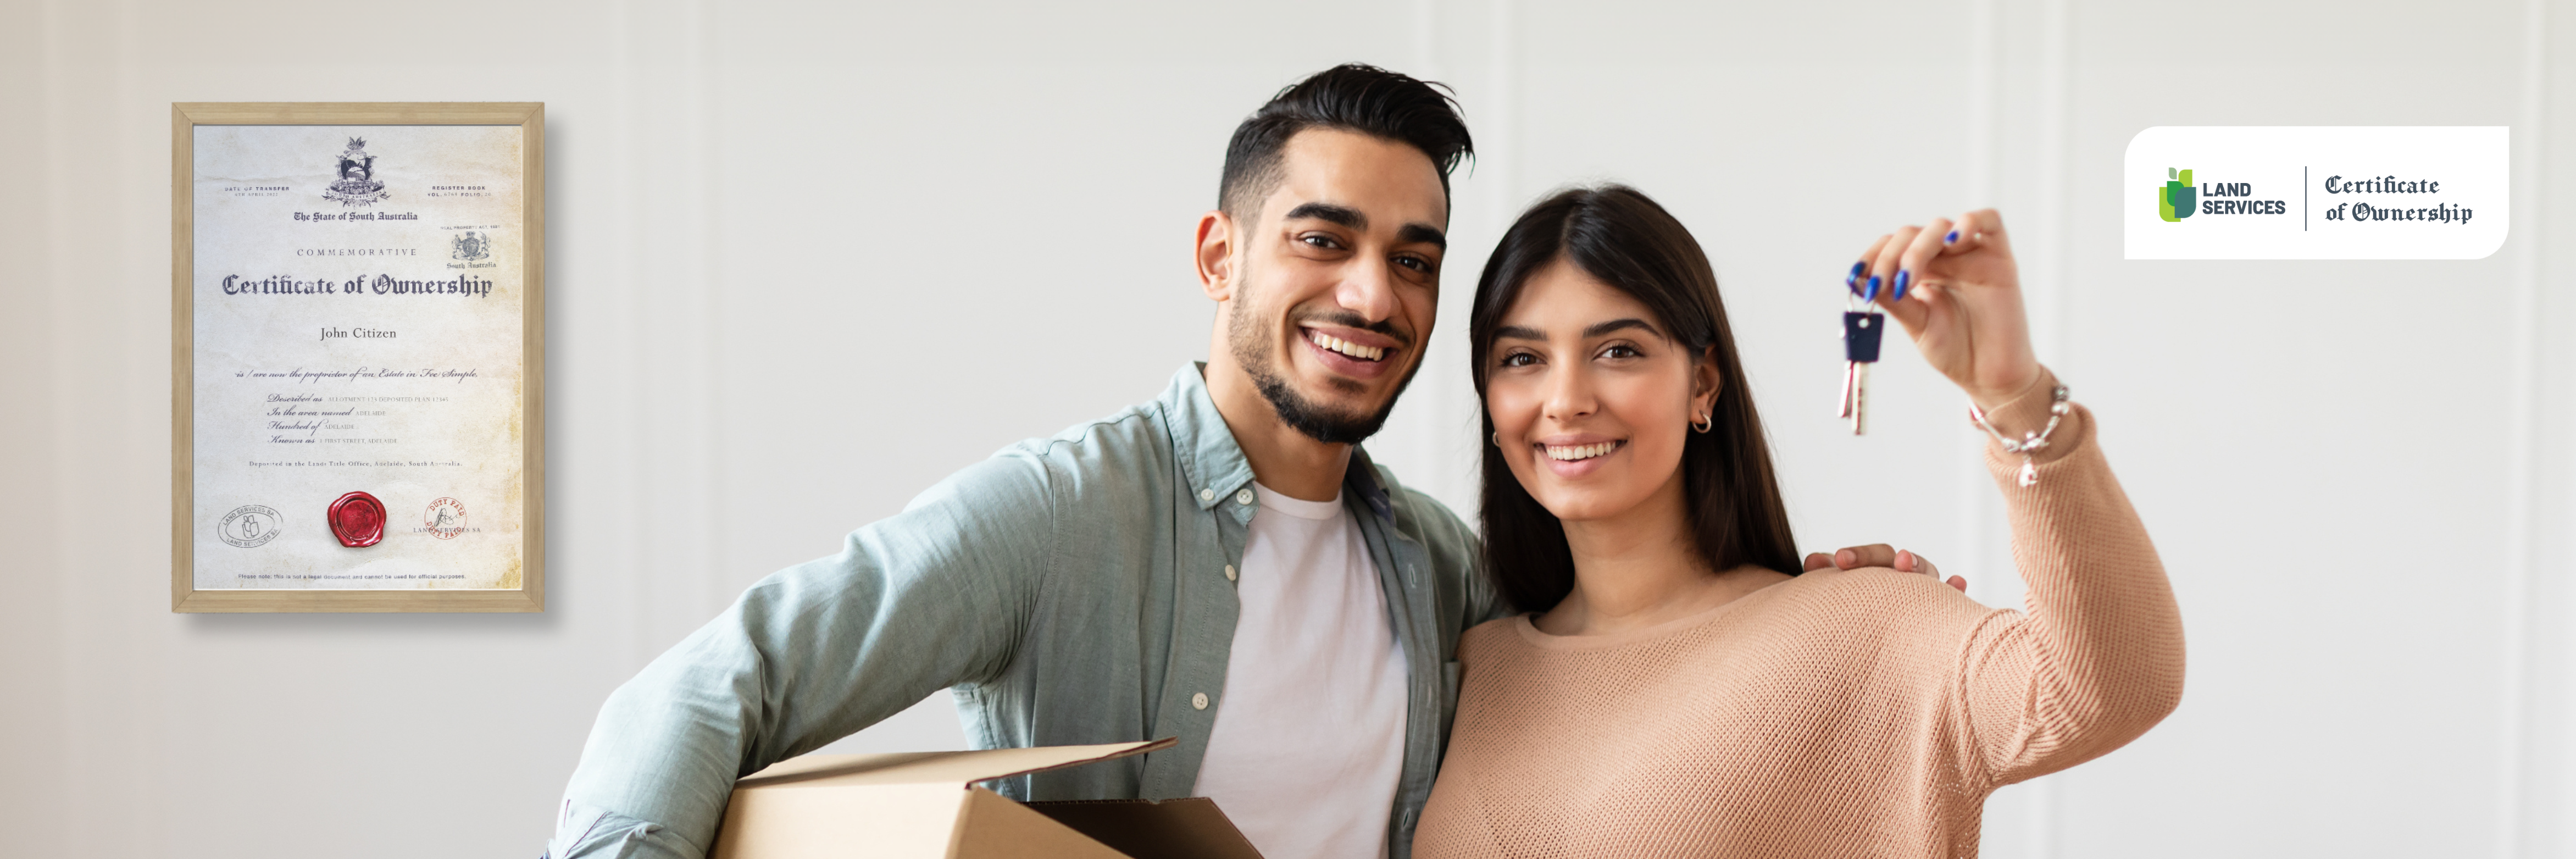 A happy young couple with a moving box, the woman holding up a set of keys, standing in front of a framed "Certificate of Ownership" on the wall, symbolizing new homeownership.